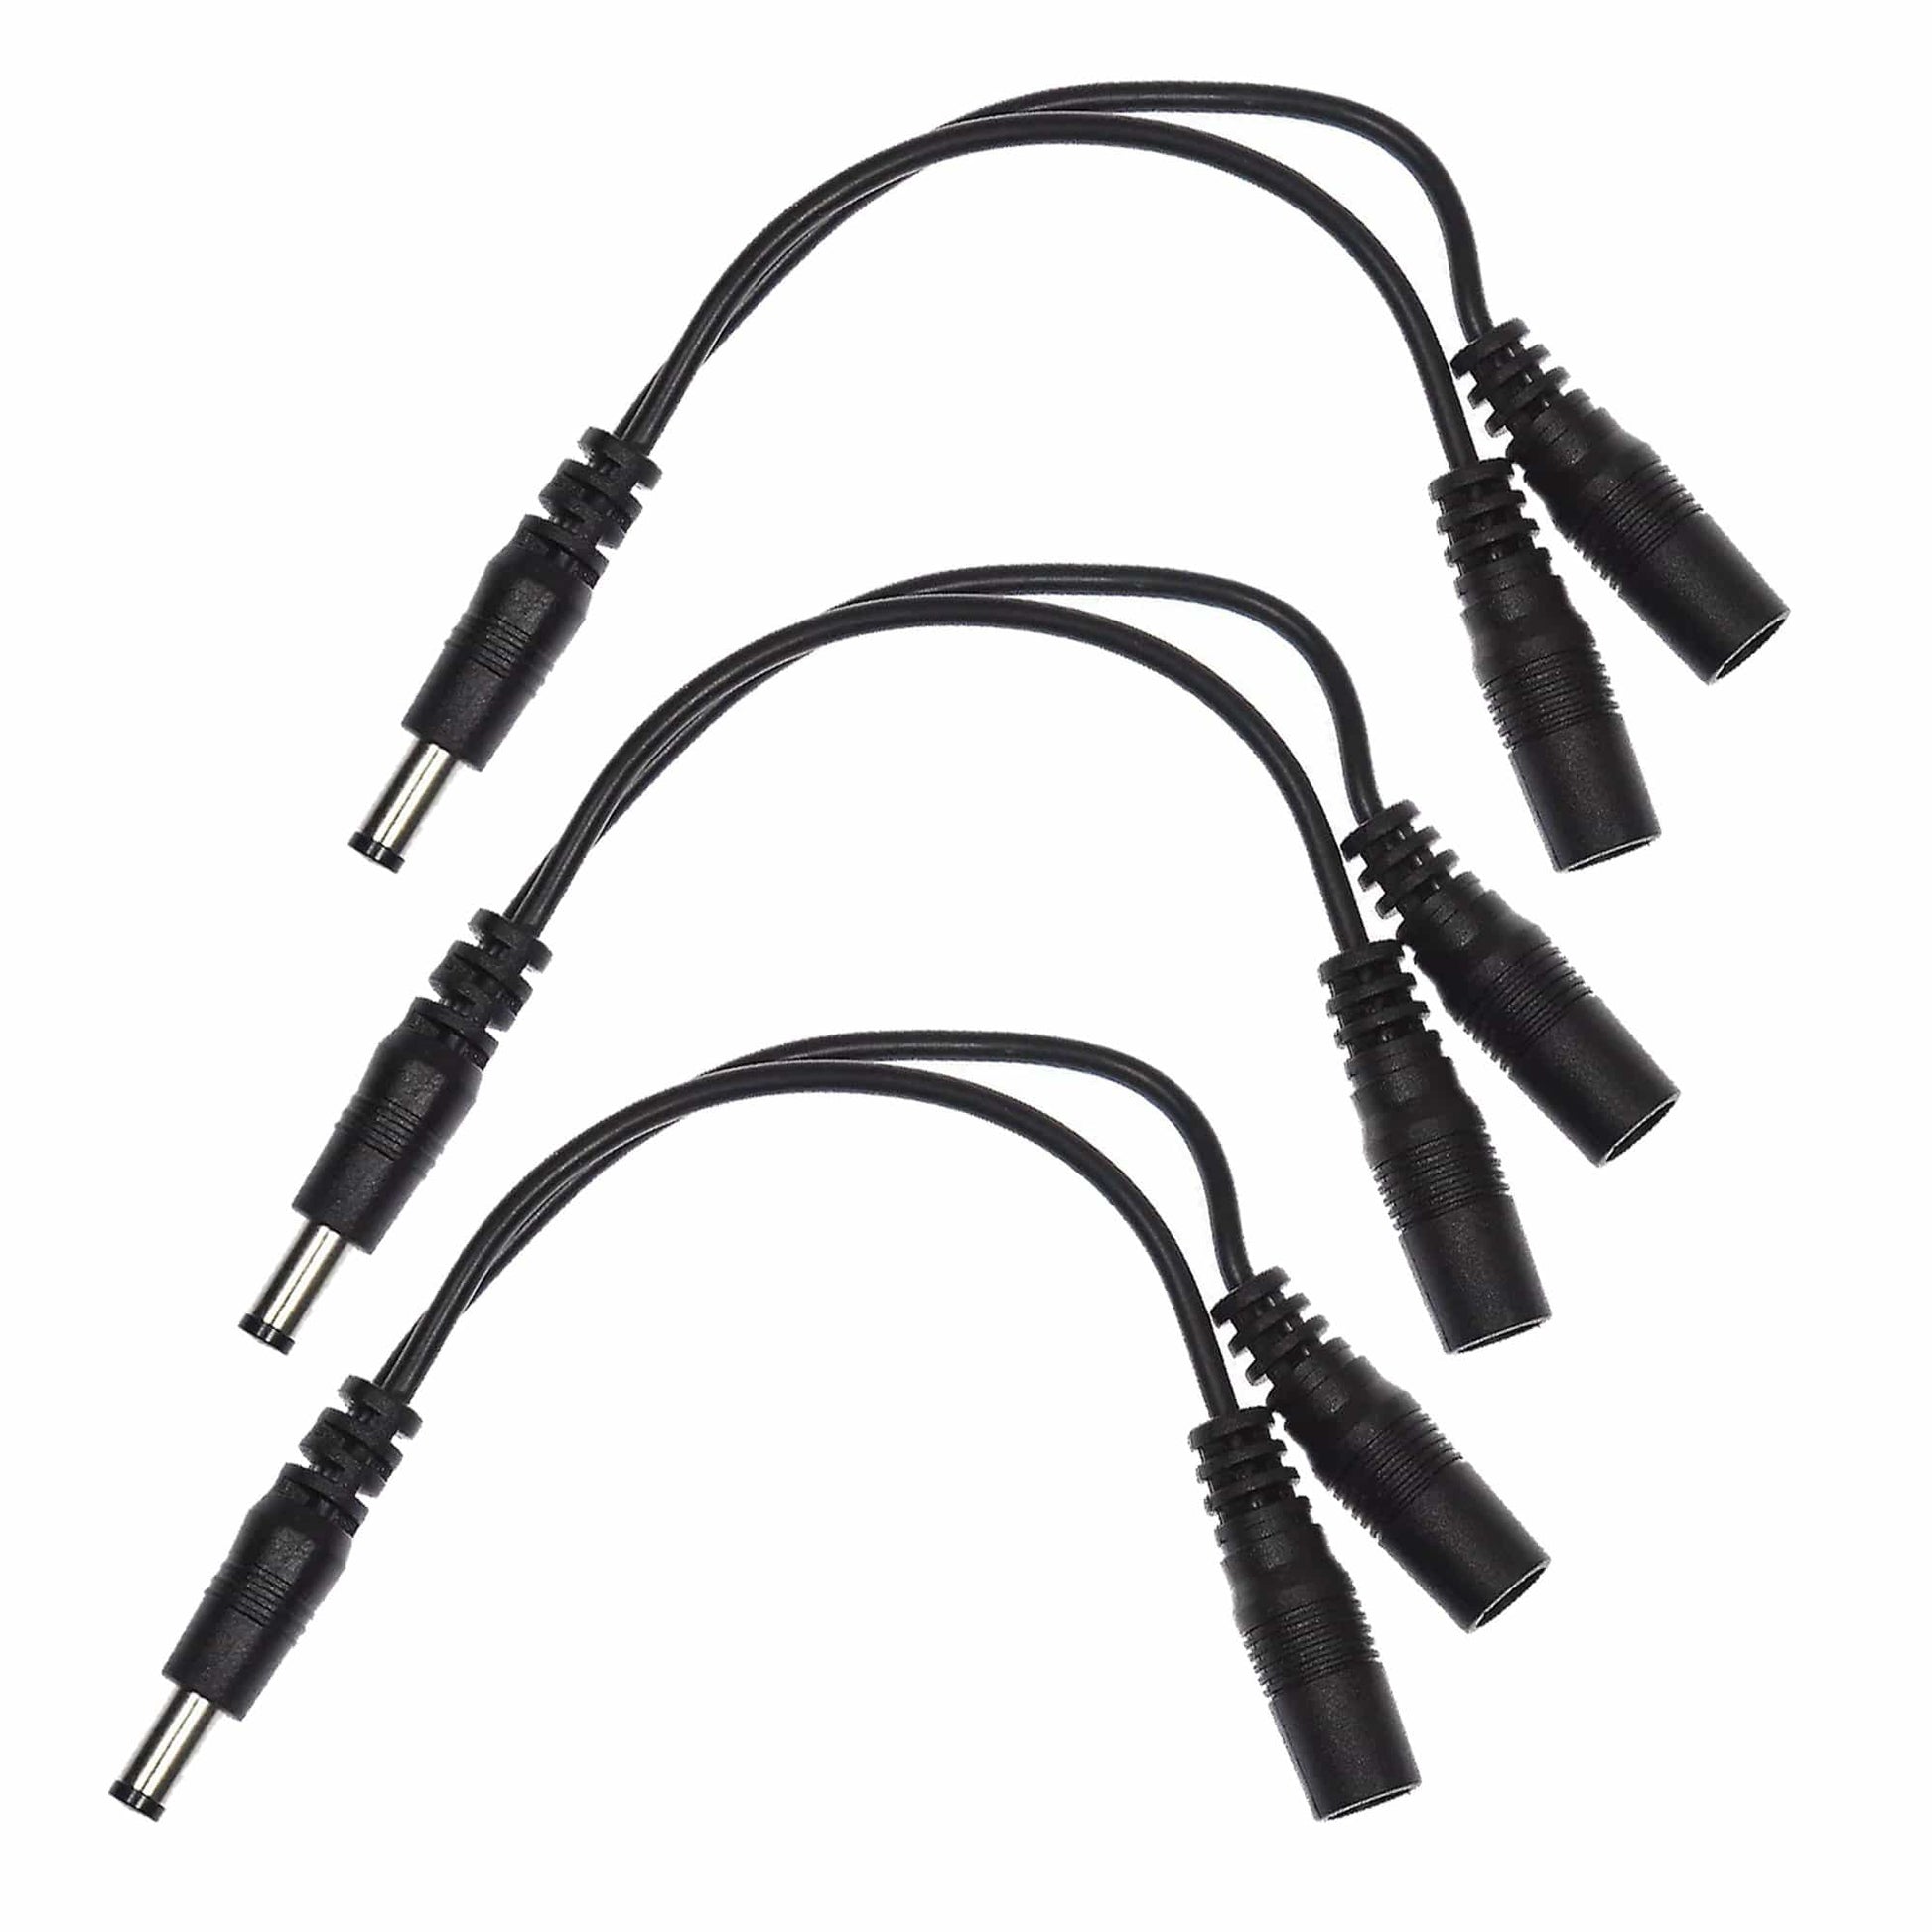 Voodoo Lab Cable 2.1mm Output Splitter Adaptor Male-Female/Female 3 Pack Bundle Accessories / Cables